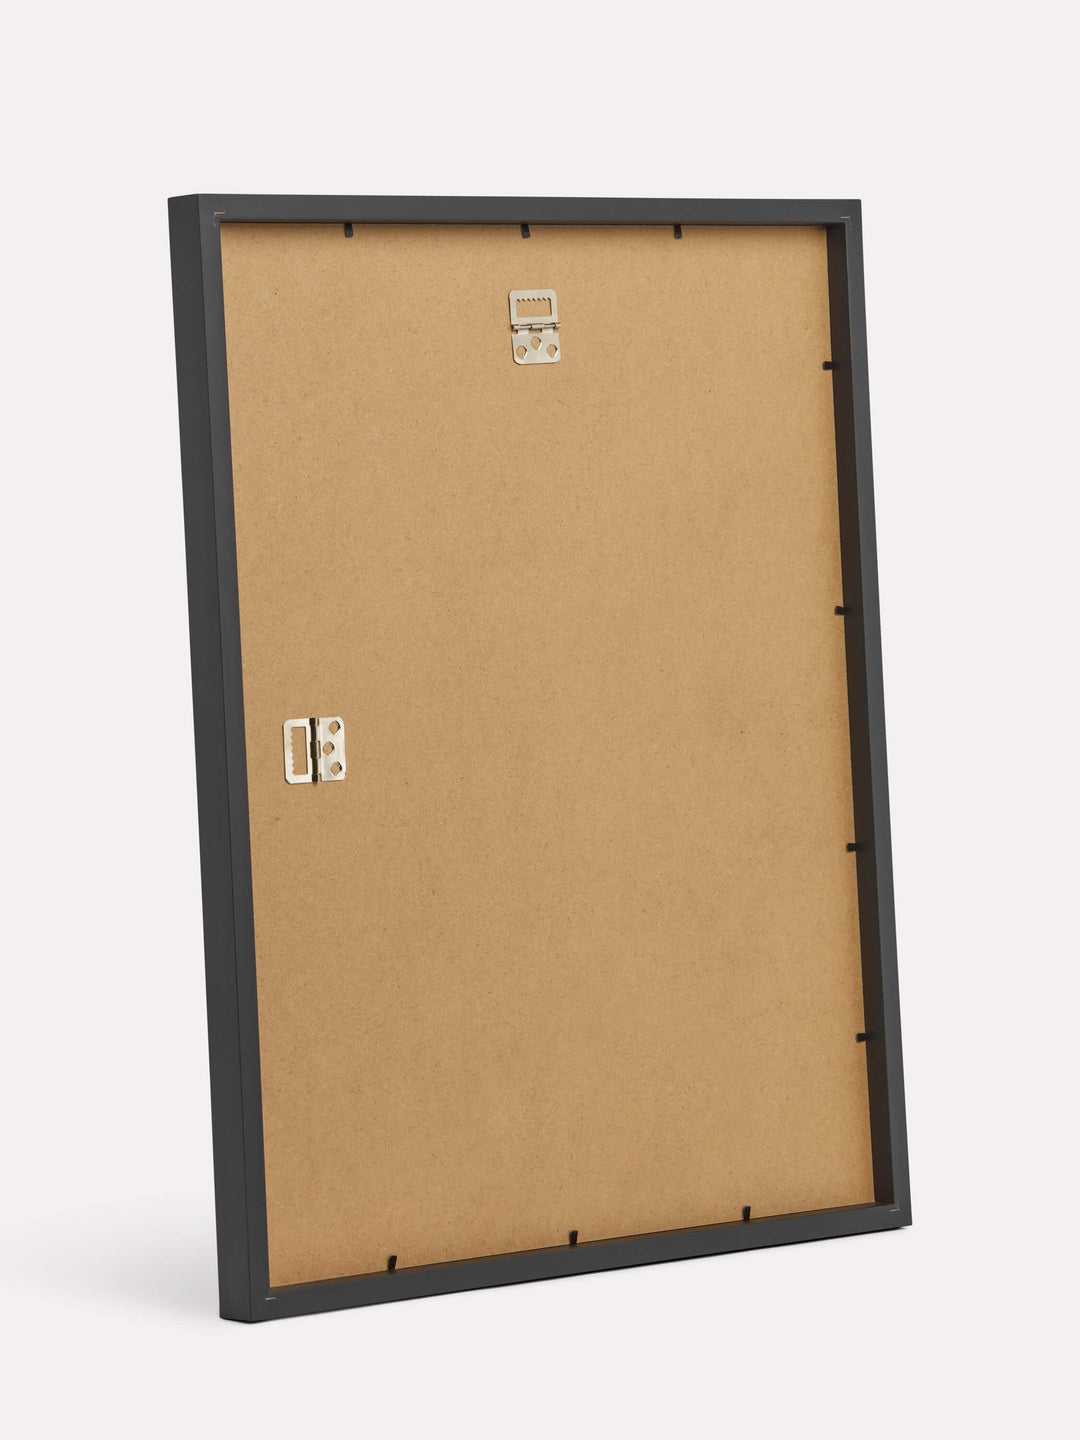 16x20-inch Classic Frame, Black - Back view